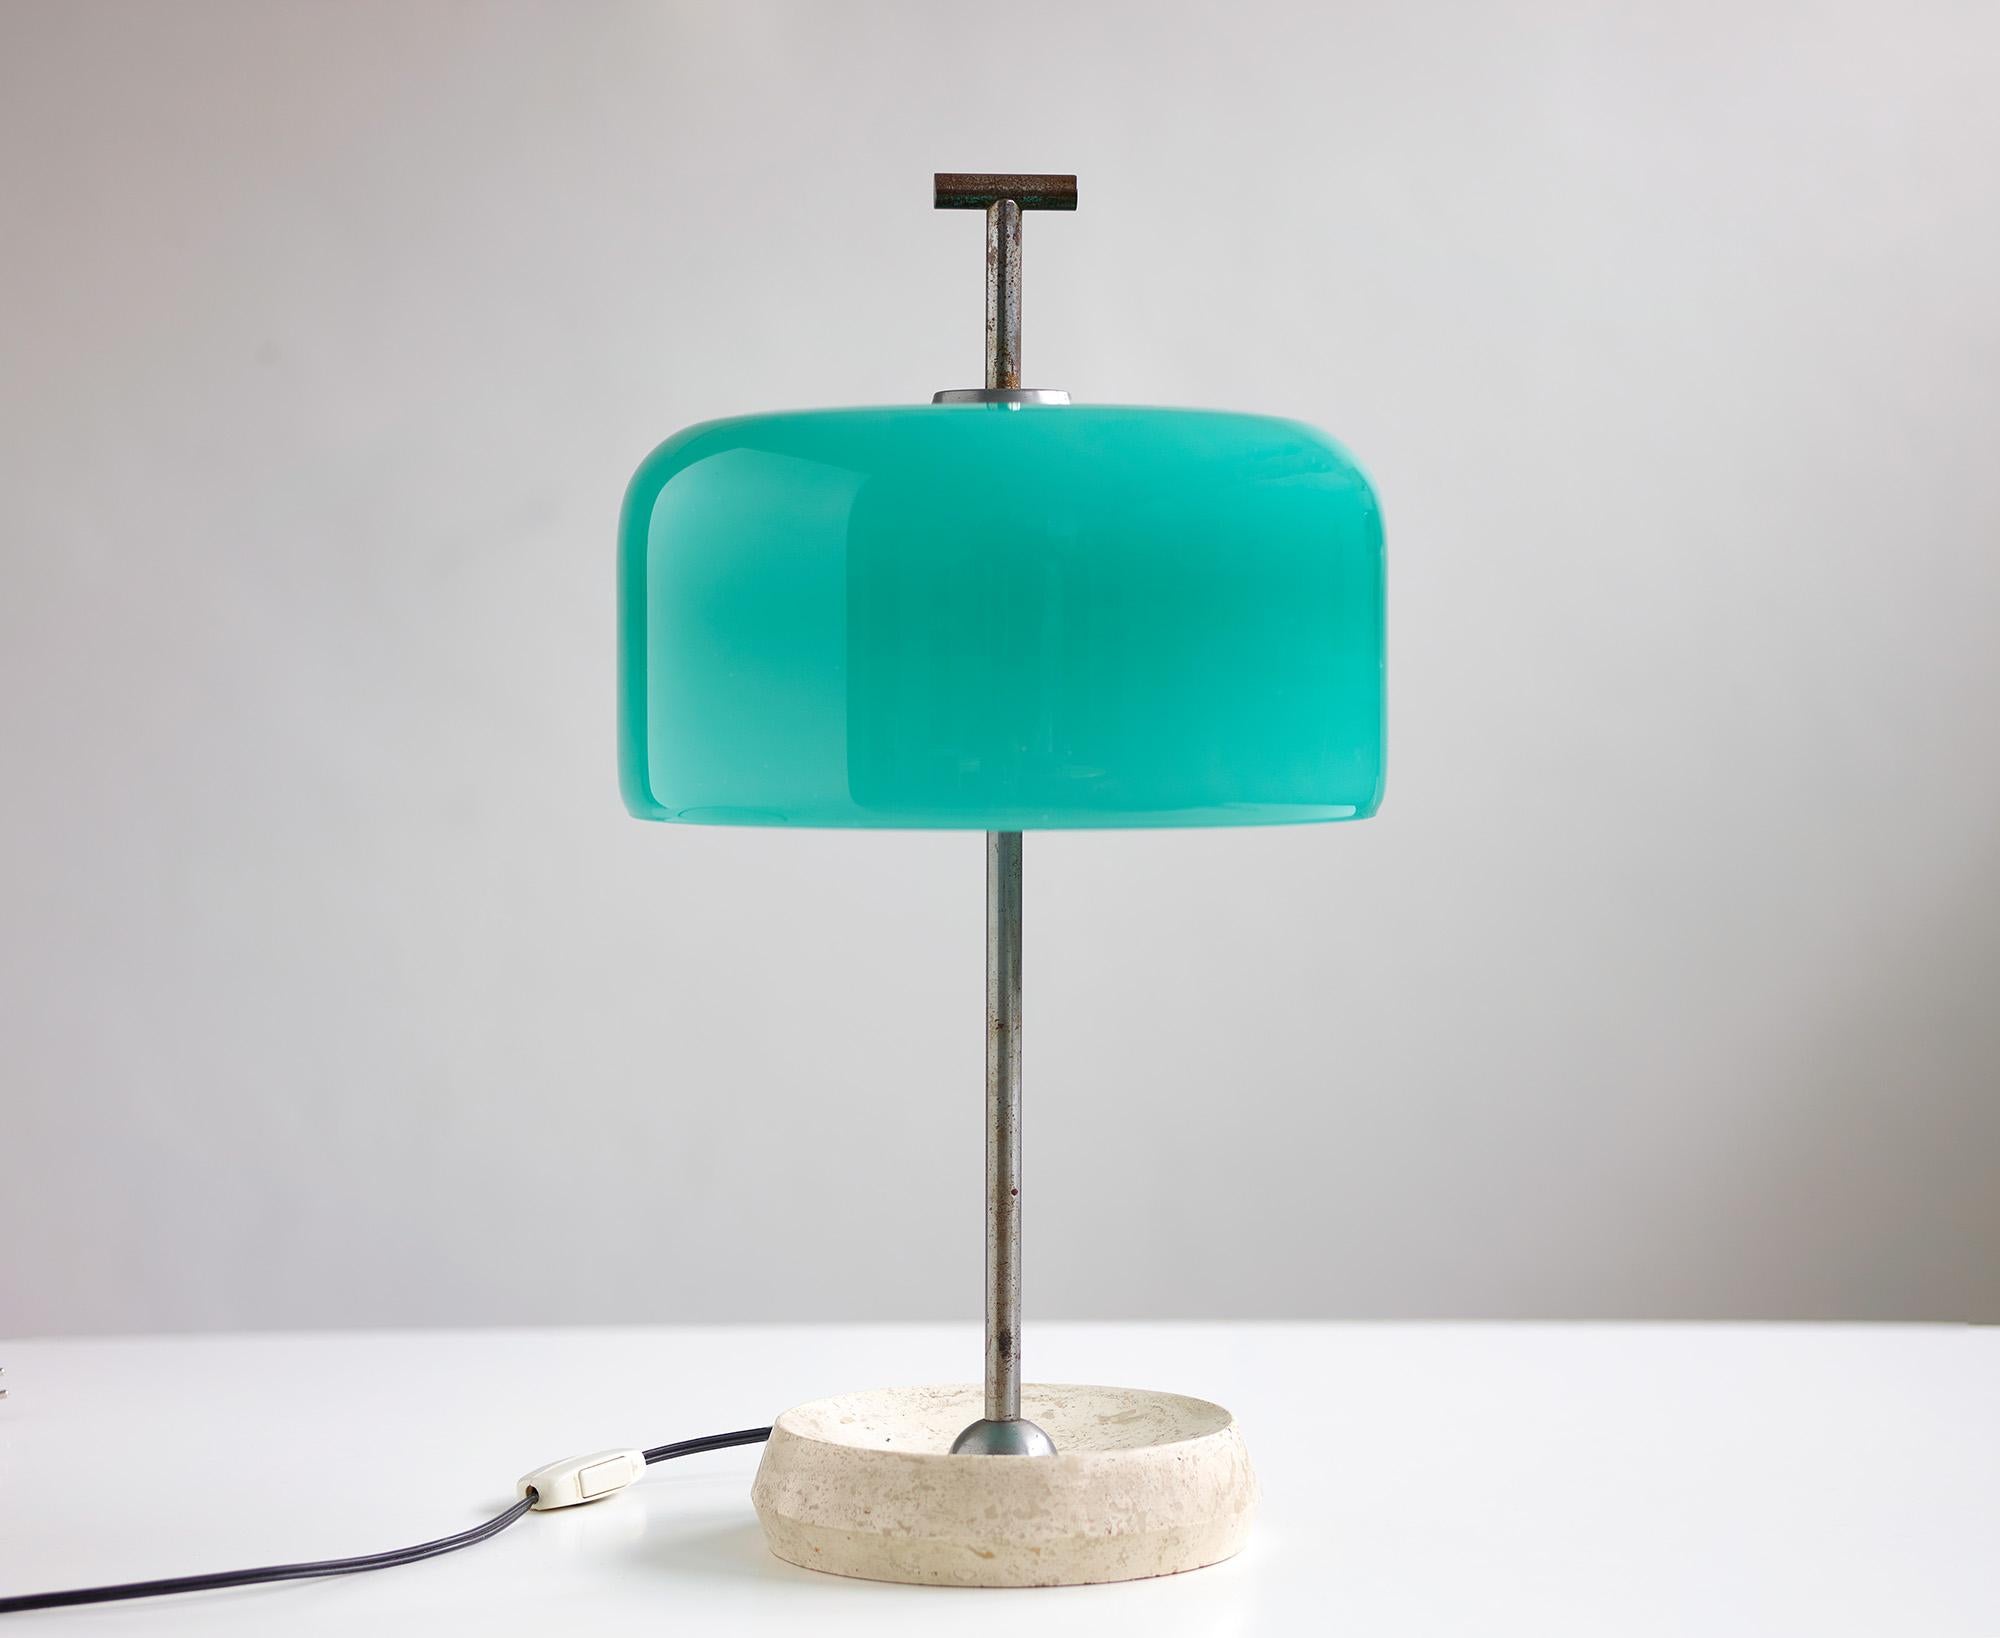 Stunning table lamp attributed to Italian glass manufacturer Vistosi.

This very well crafted table lamp boast a beautiful emerald green Murano glass shade with 3 E14 light sources and a round travertine base with beveled edges.

When illuminated